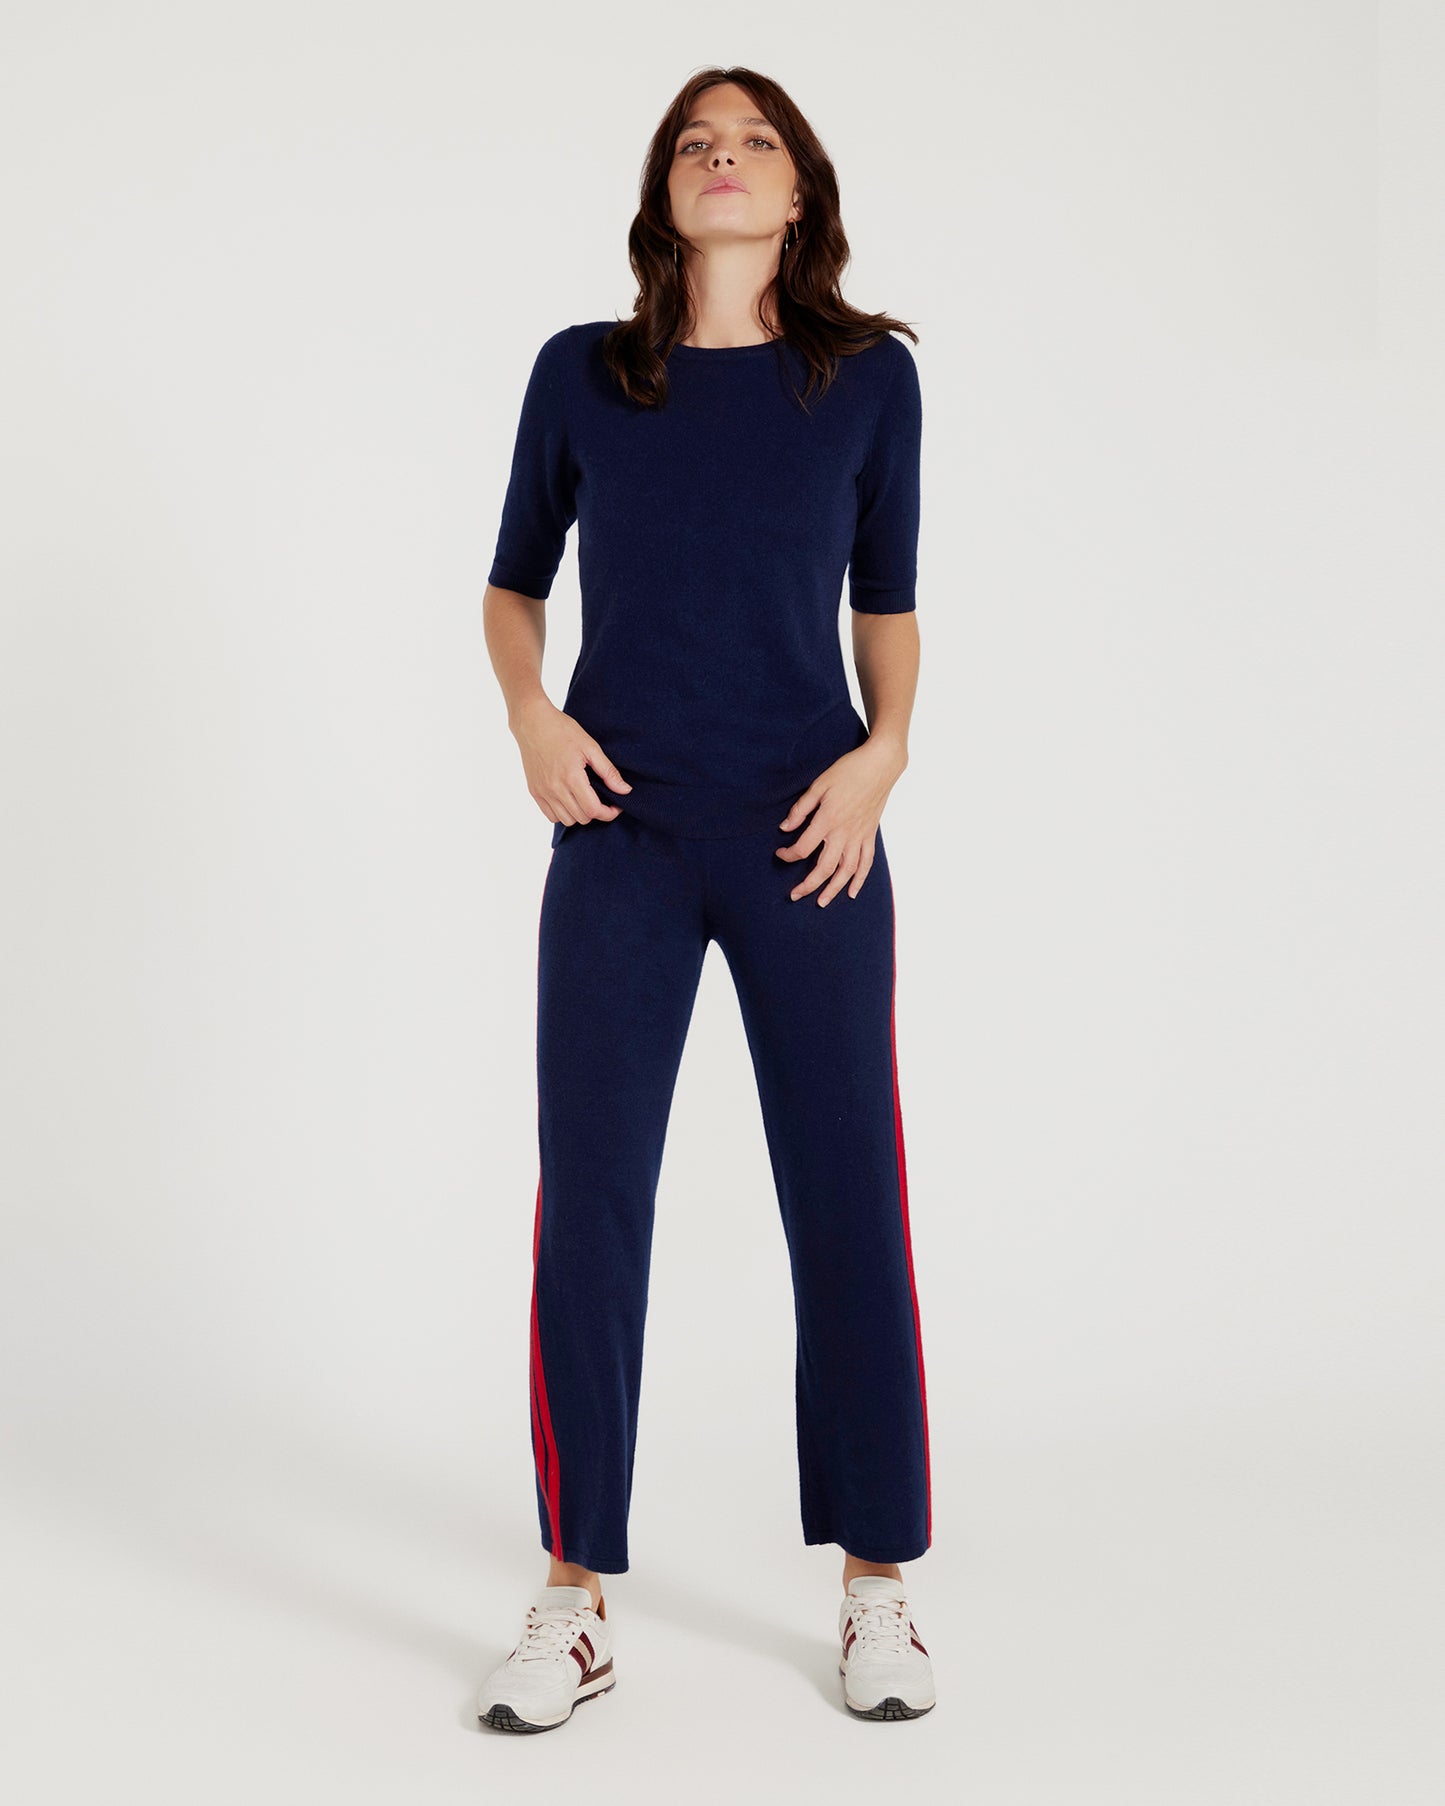 Cashmere & Wool Pant - Navy Blue With Red Stripe